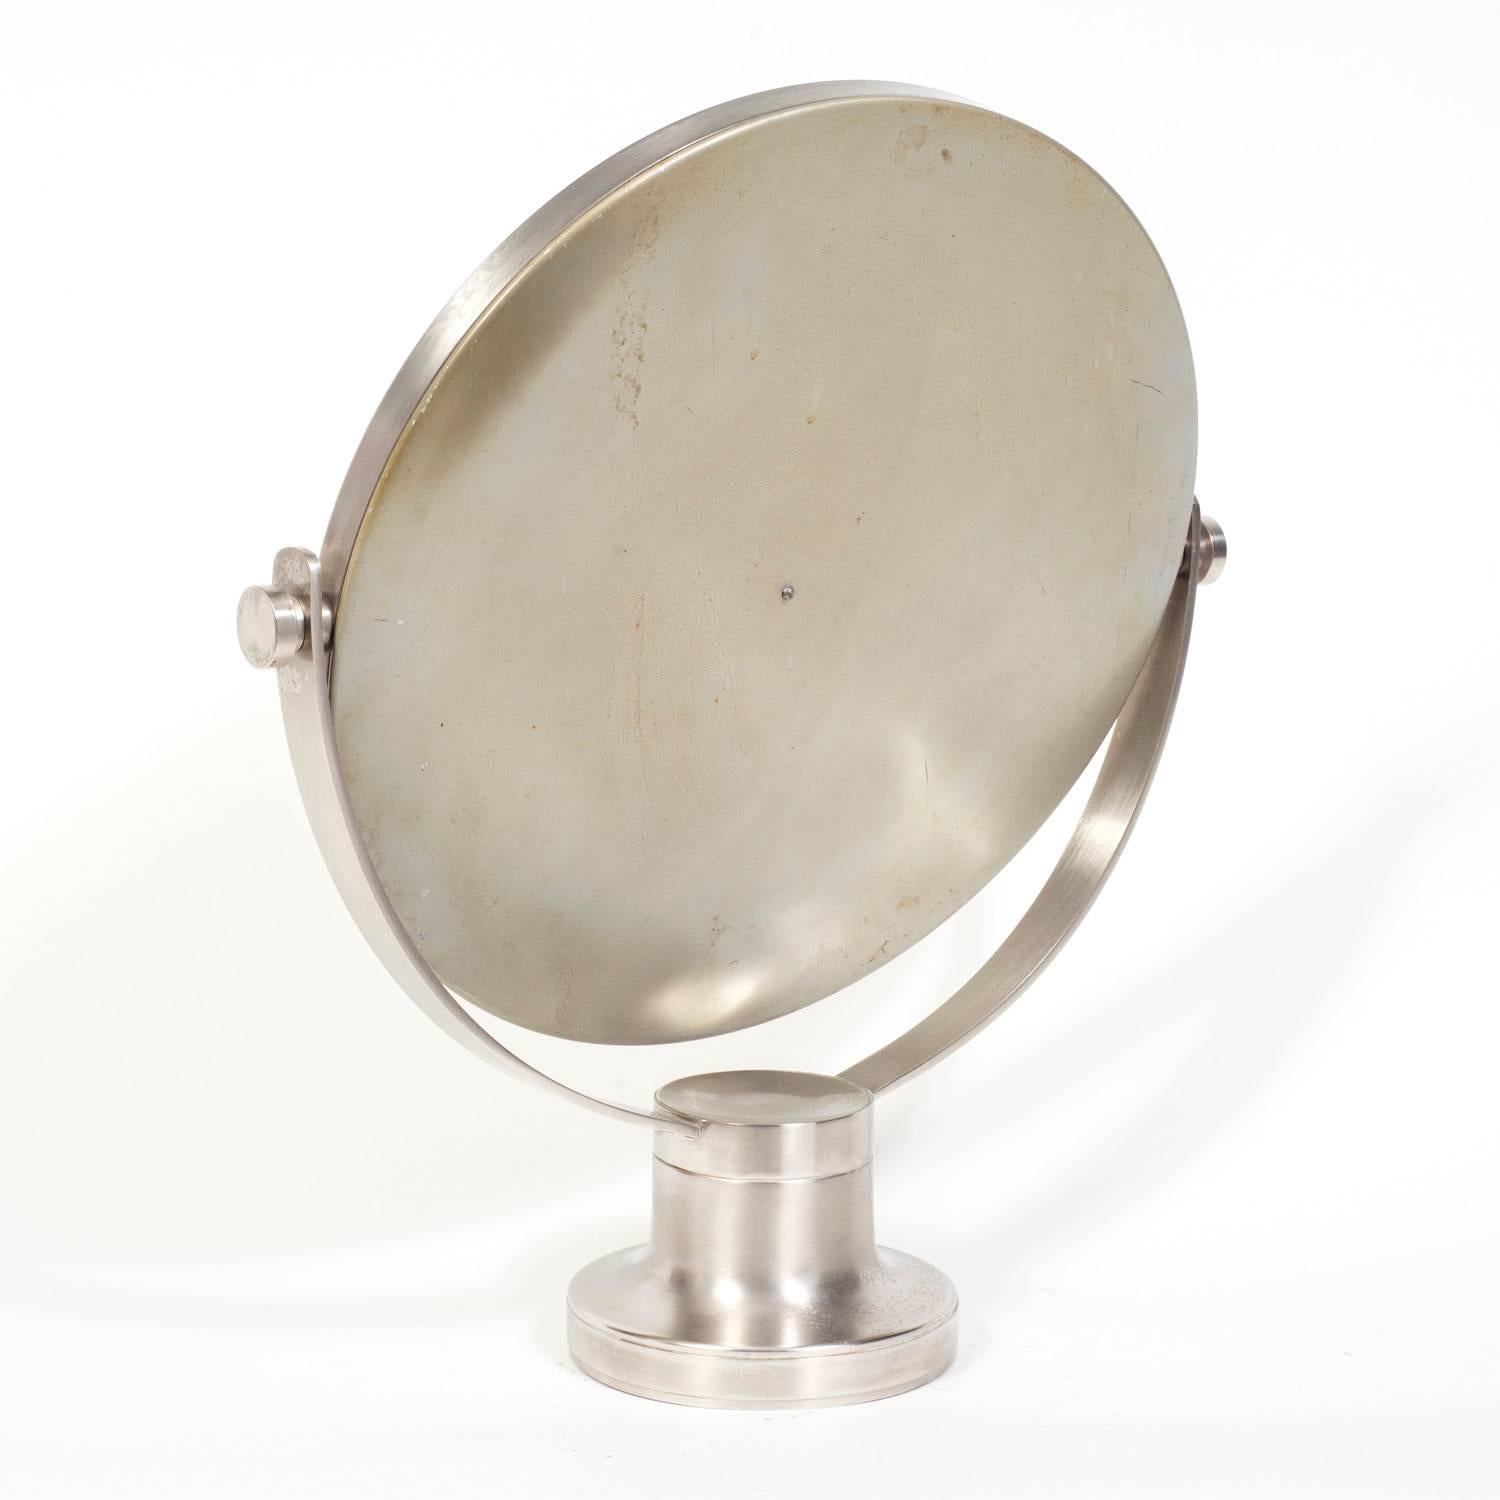 Mazza, known for his mirrors, designed a variety of these finely made vanity mirrors.